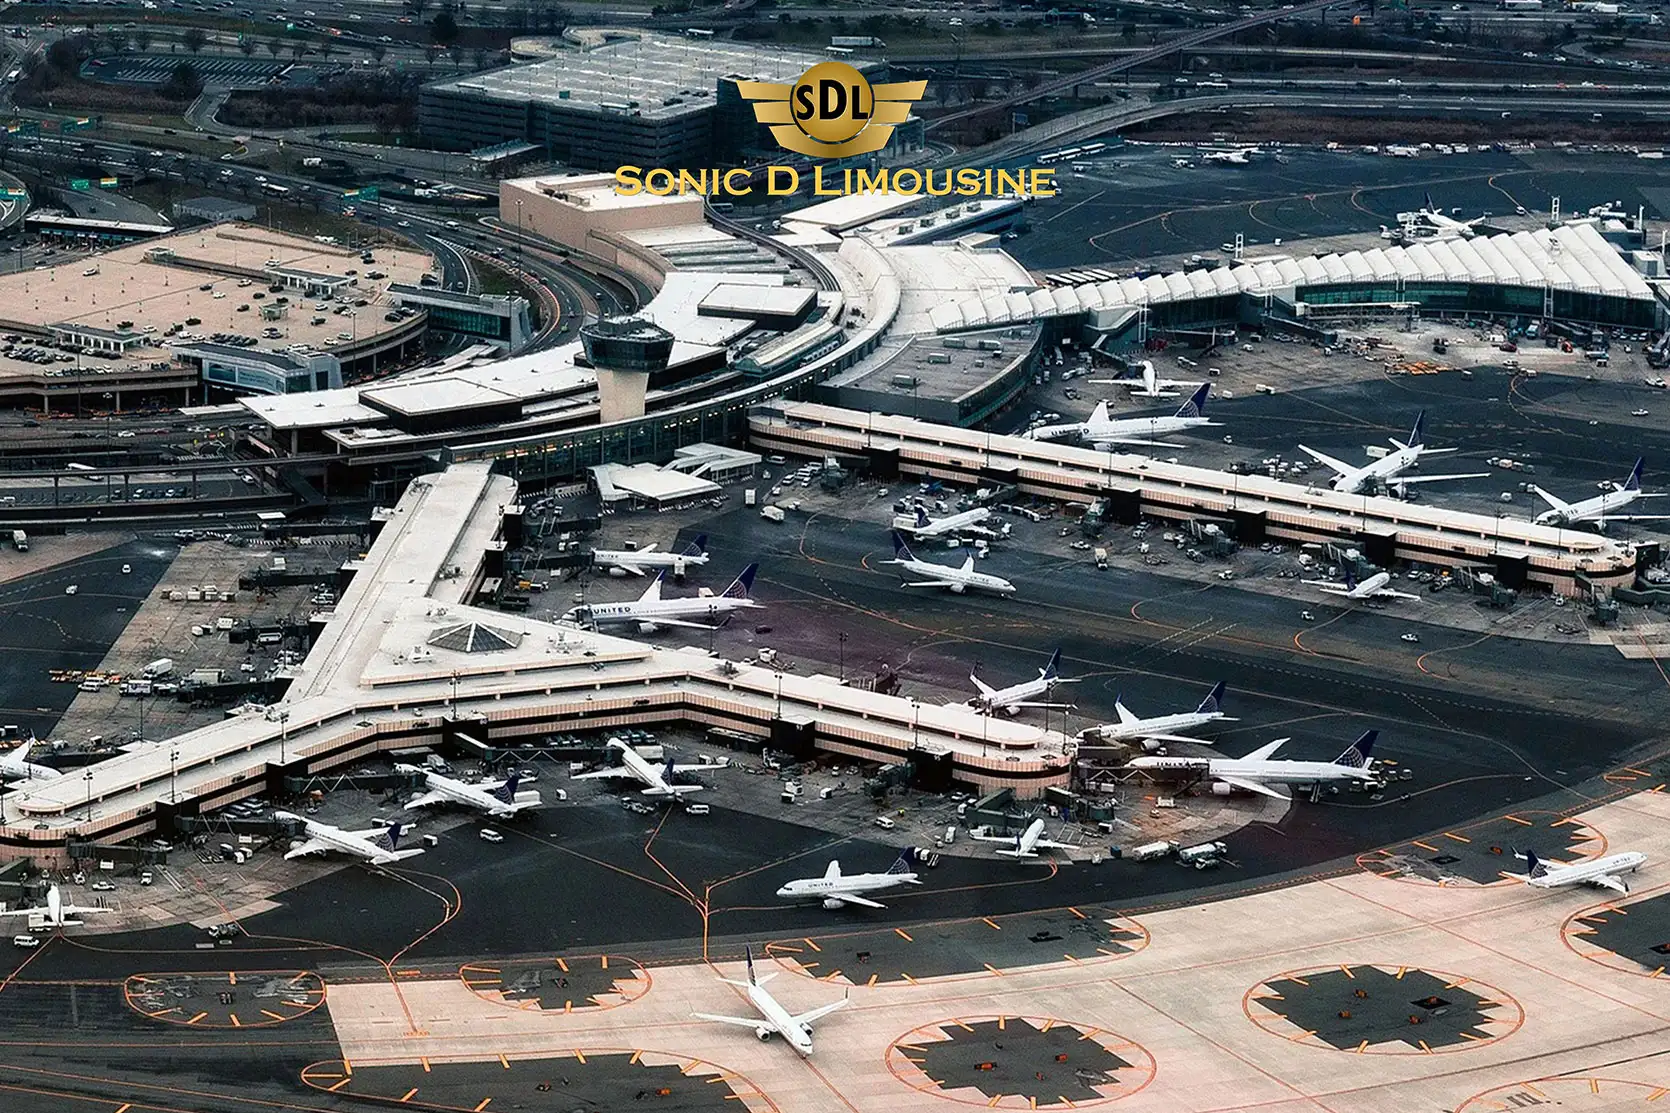 Sonic D Limousine An aerial view of an airport with many planes parked.